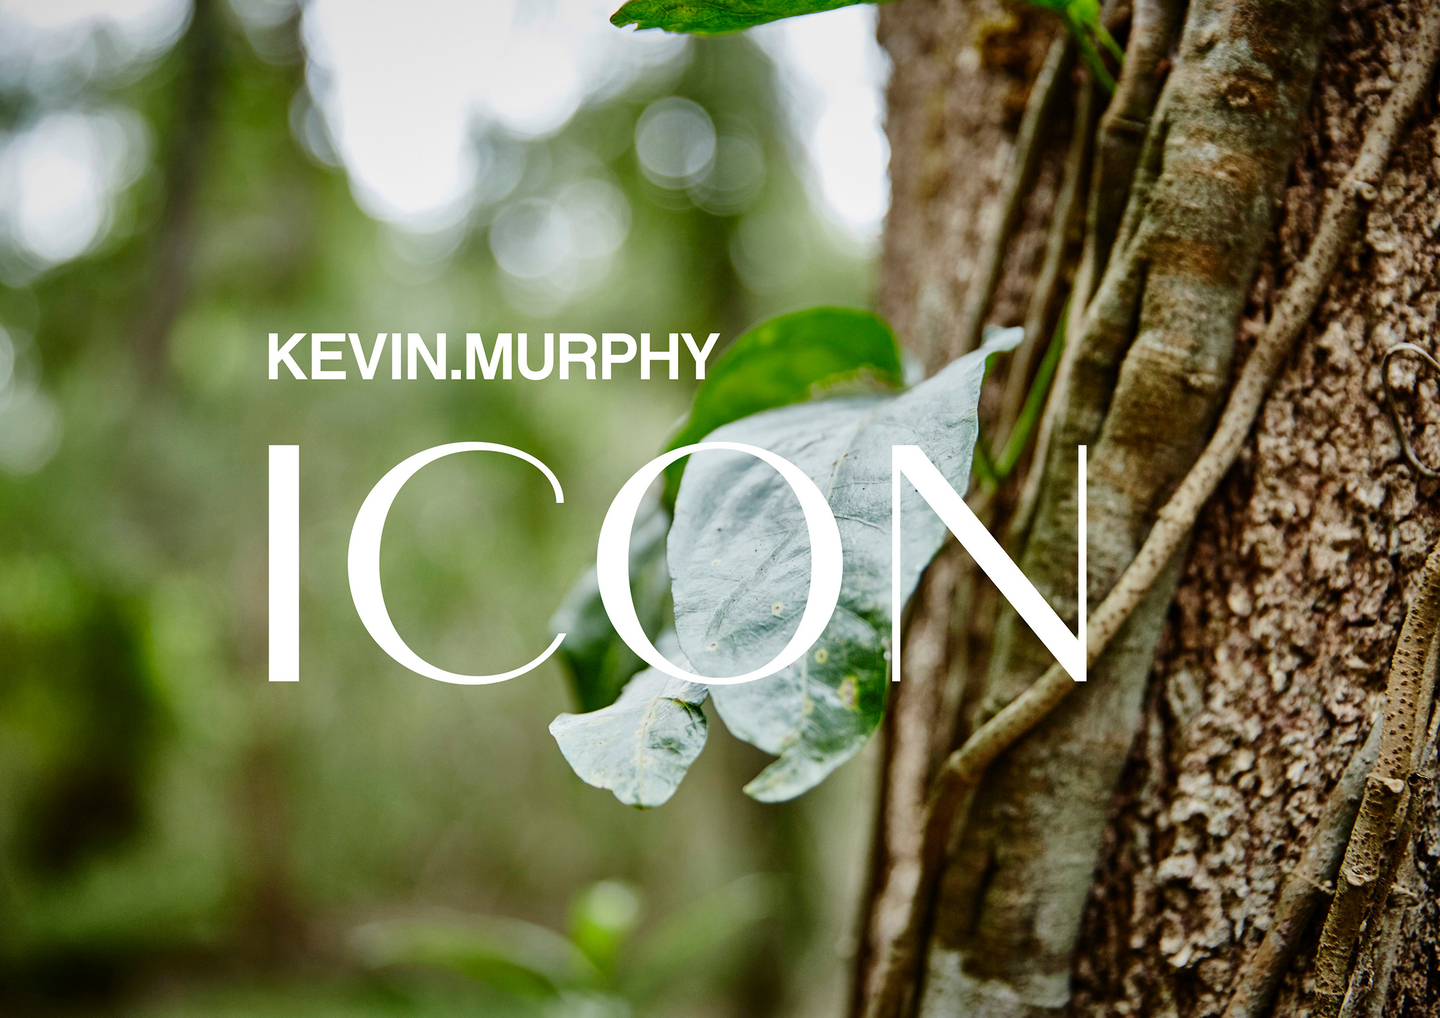 KEVIN.MURPHY ICON branding over a natural leafy background, emphasizing eco-friendly haircare.